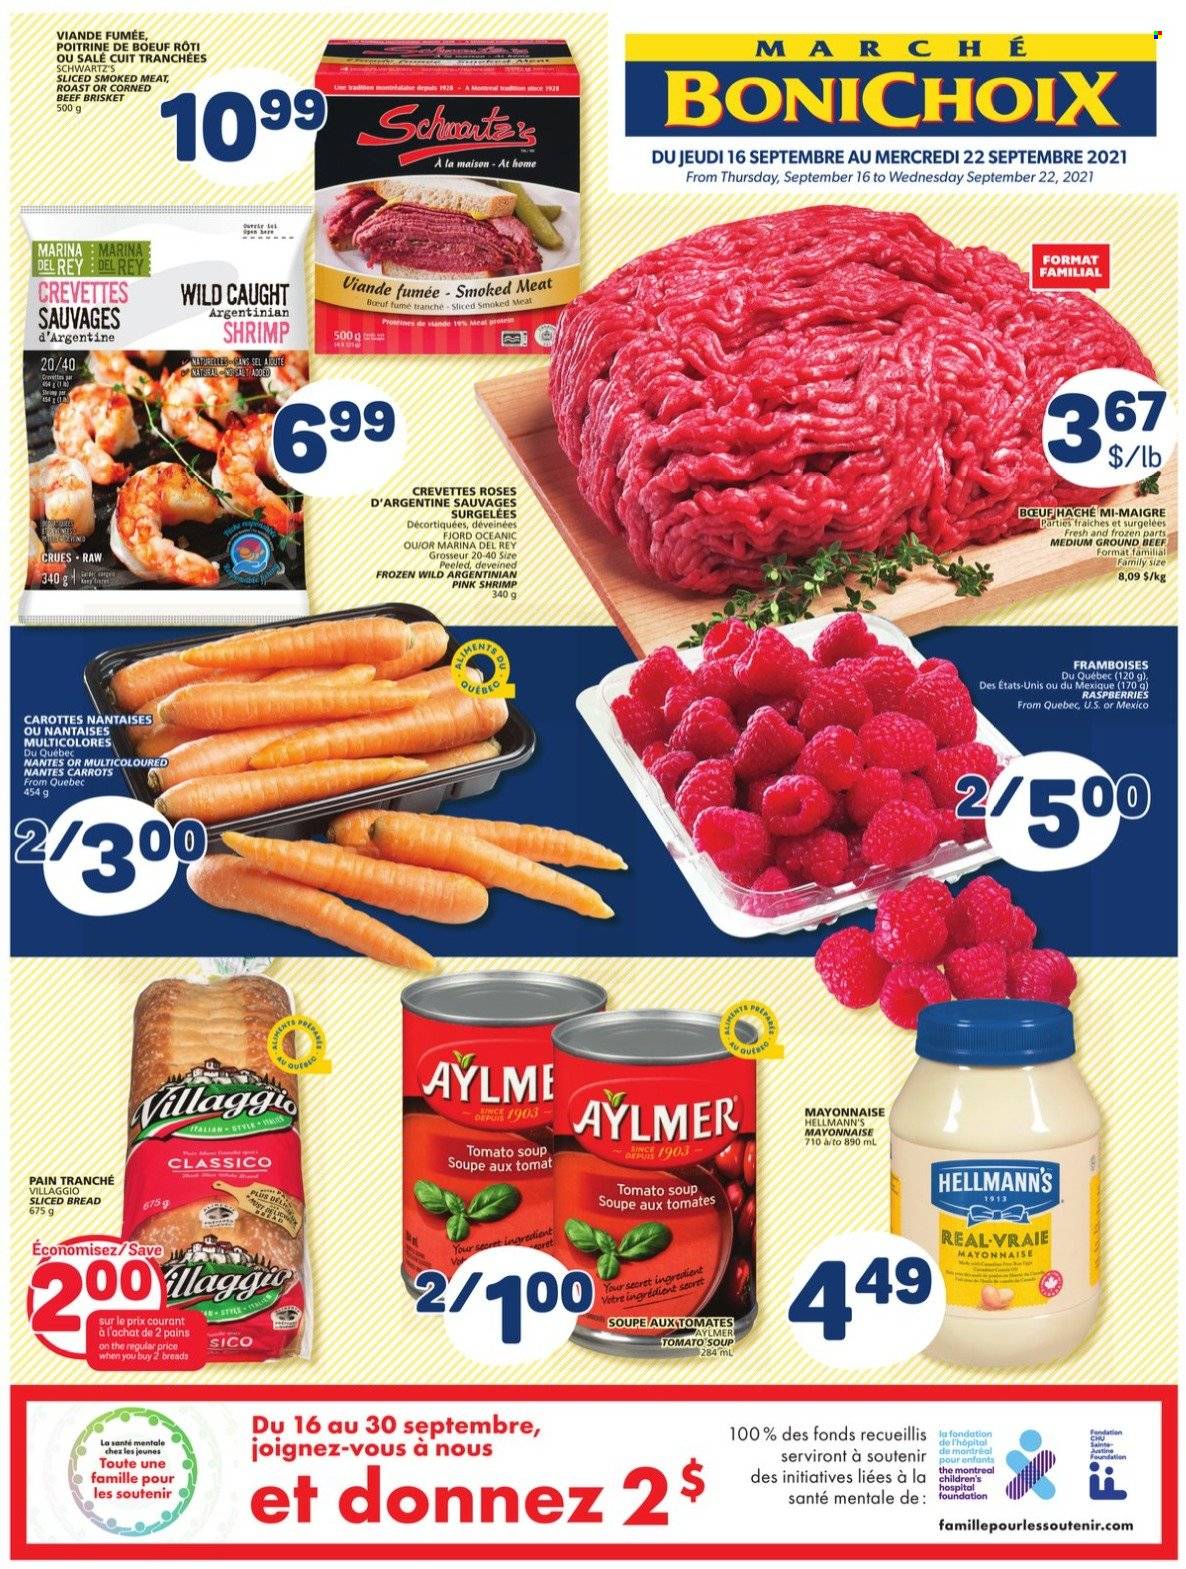 thumbnail - Marché Bonichoix Flyer - September 16, 2021 - September 22, 2021 - Sales products - bread, carrots, shrimps, tomato soup, soup, mayonnaise, Hellmann’s, Classico, beef meat, ground beef, beef brisket. Page 1.